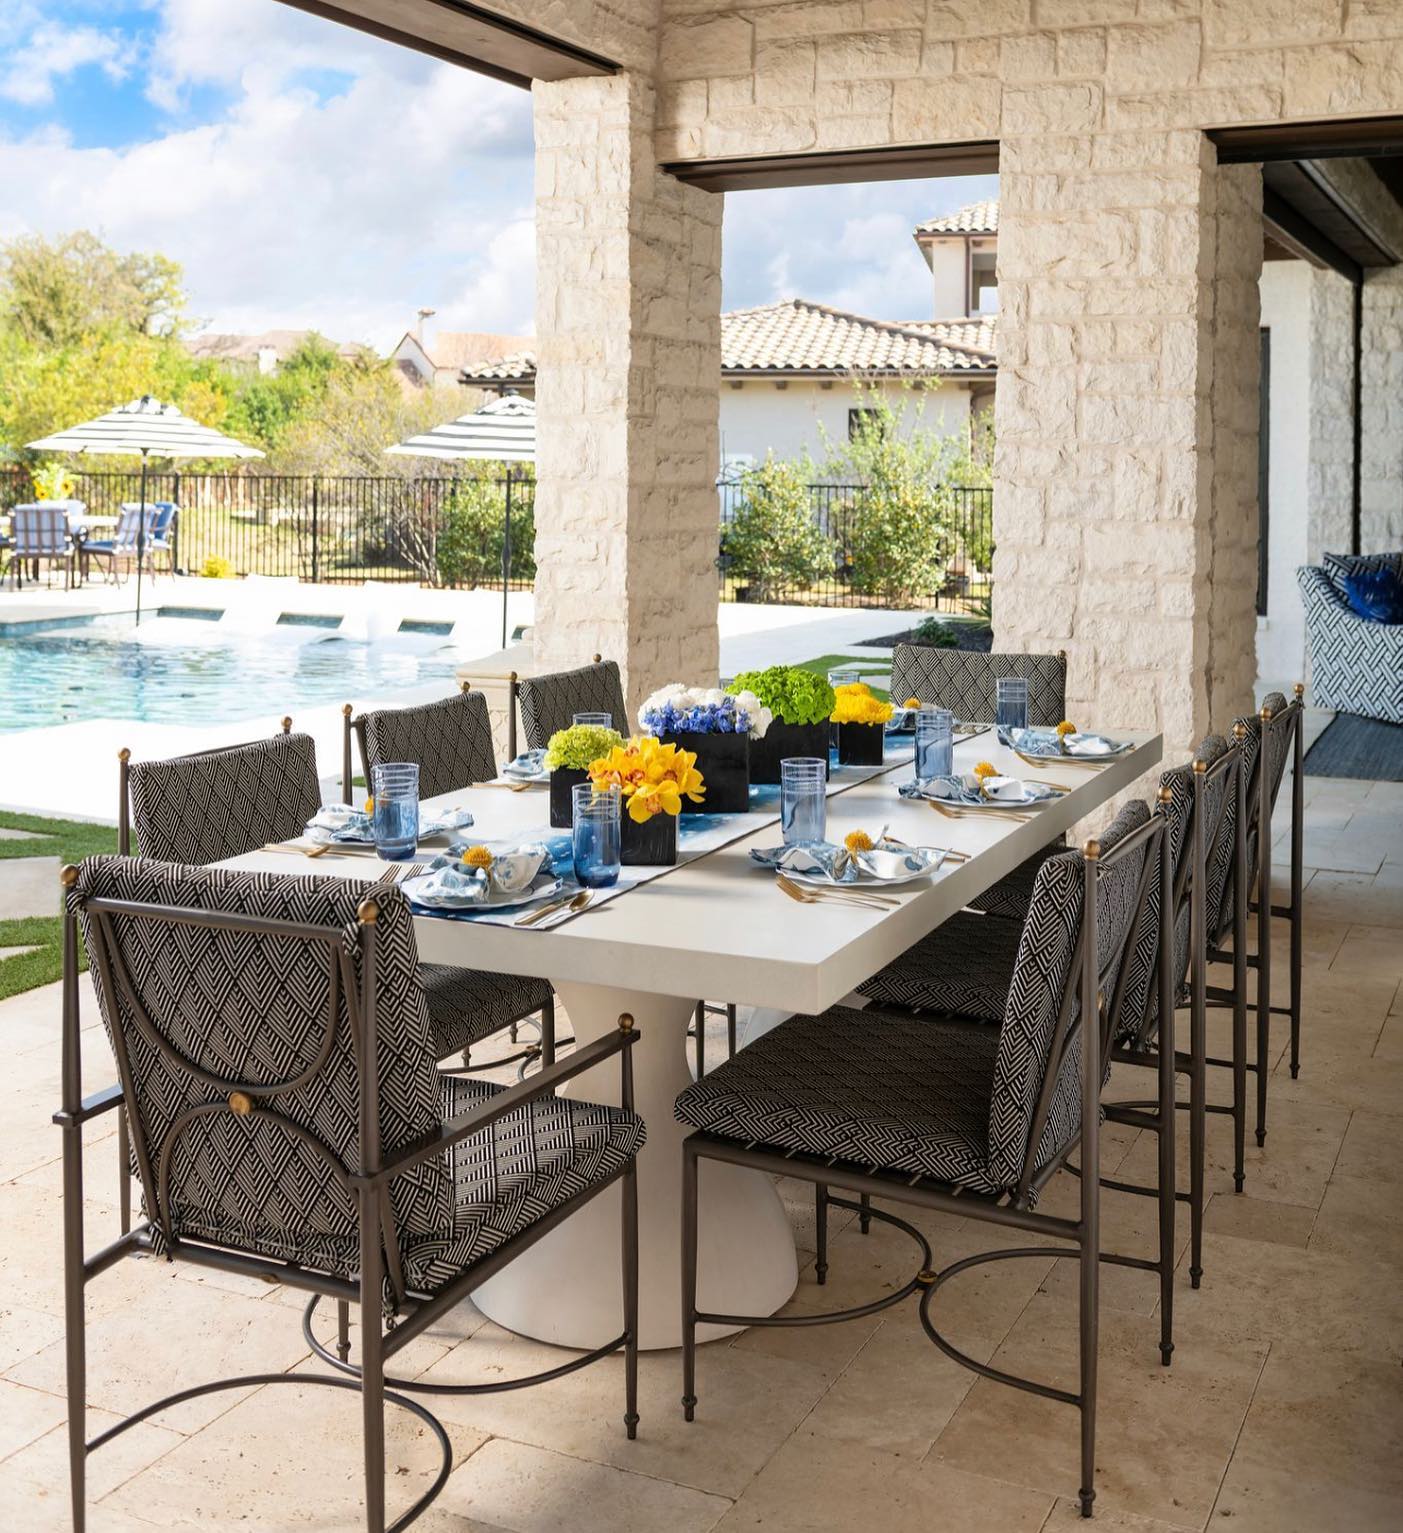 Dining #alfresco done right! Summer soirées are always in style with the help of #teamIBB. We believe your exterior spaces should be just as stunning as your interiors! Outdoor furnishings & fabrics available thru our store in #Frisco. #outdoorliving #exteriordesign #backyardresort #outdoorfurniture #dinealfresco #summersoiree #designerfurniture #outdoorstyle #designinspo #exteriorideas #outdoordining #Dallasdesign #ibbdesign